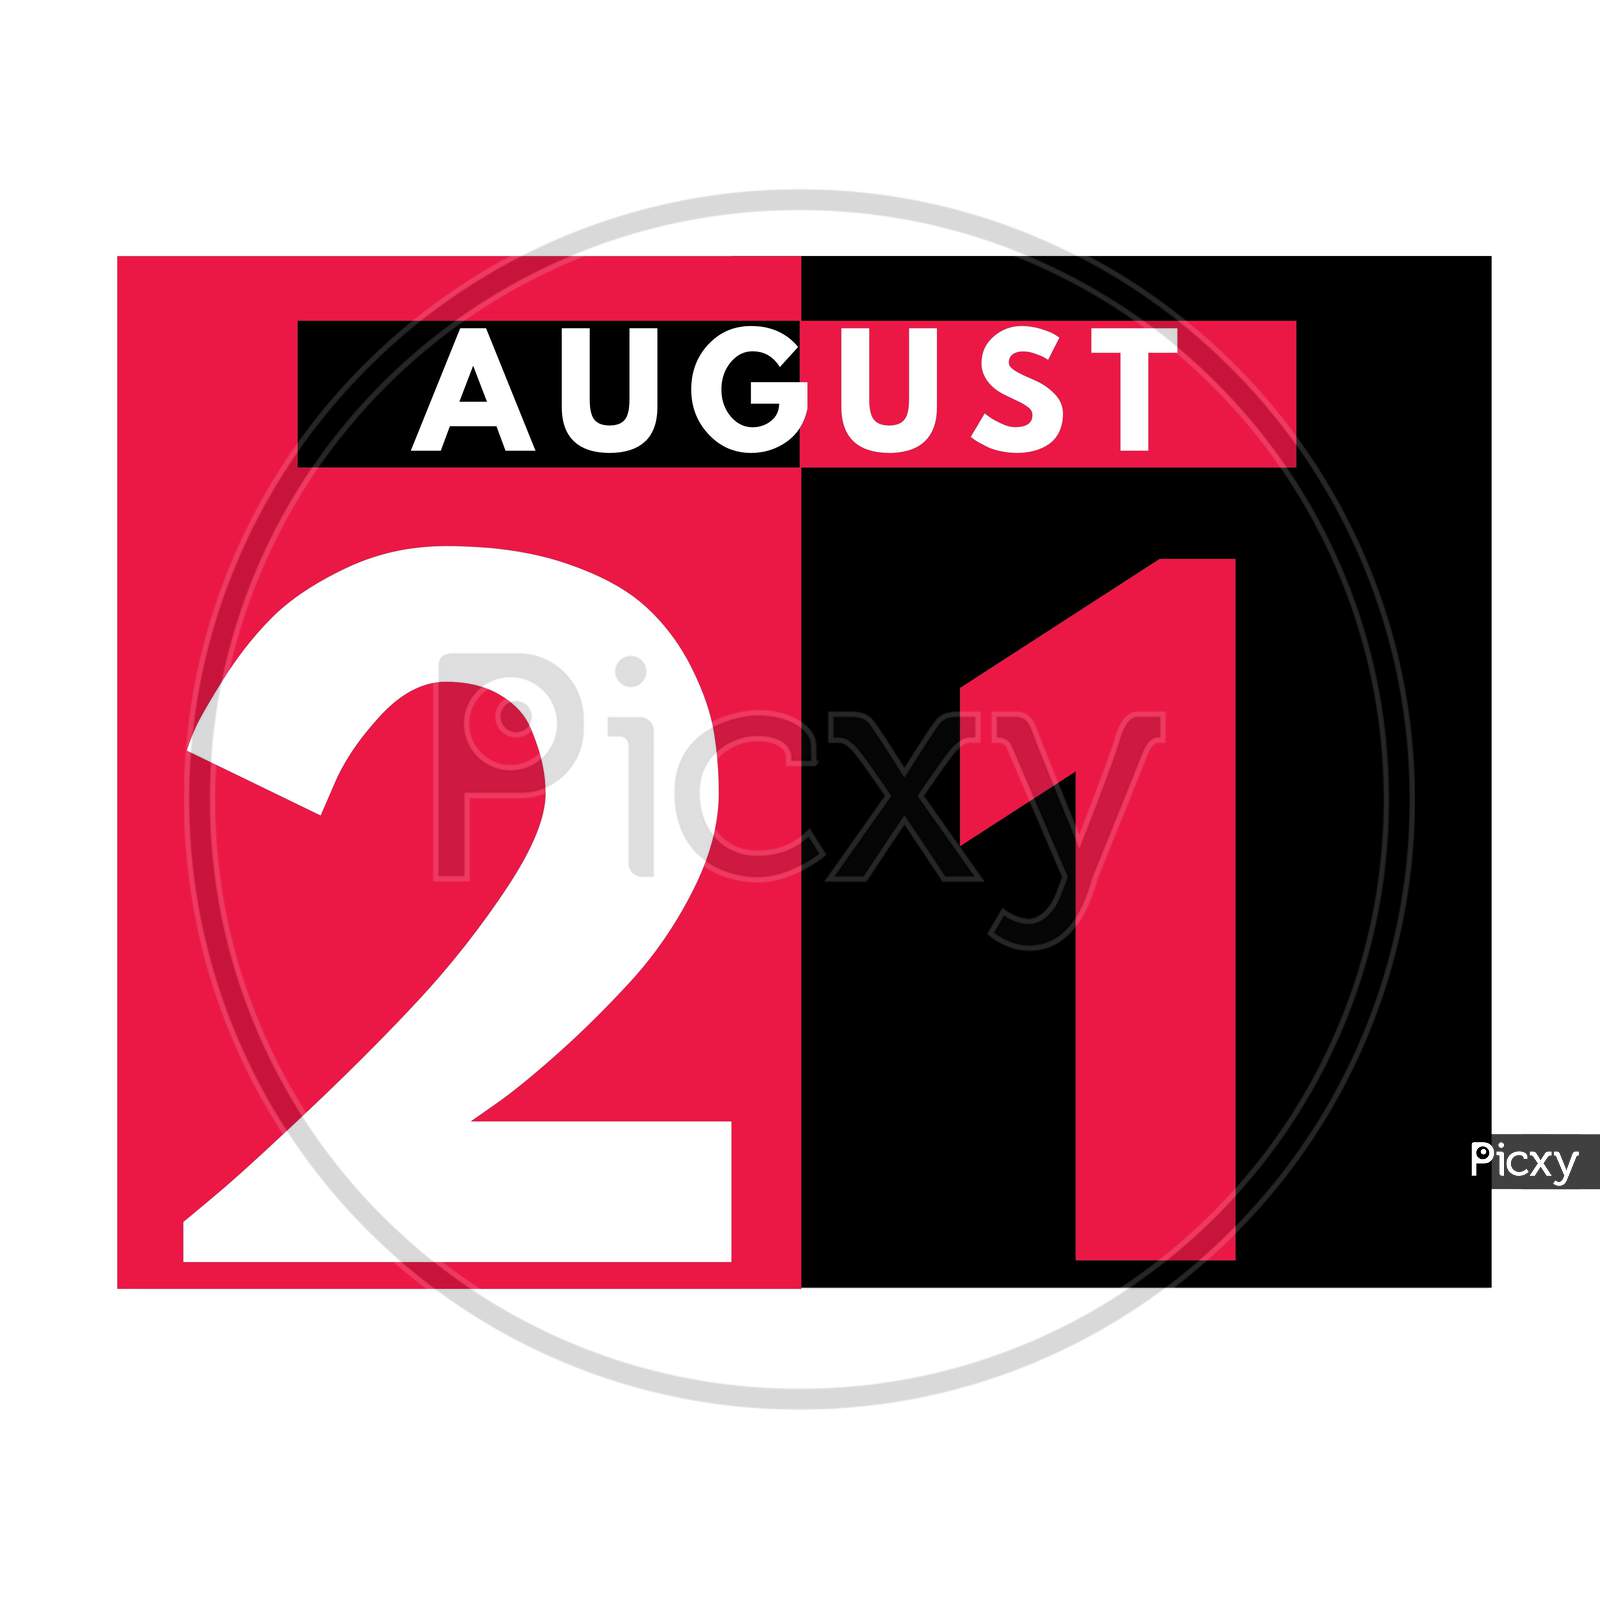 August 21 . Modern Daily Calendar Icon .Date ,Day, Month .Calendar For The Month Of August